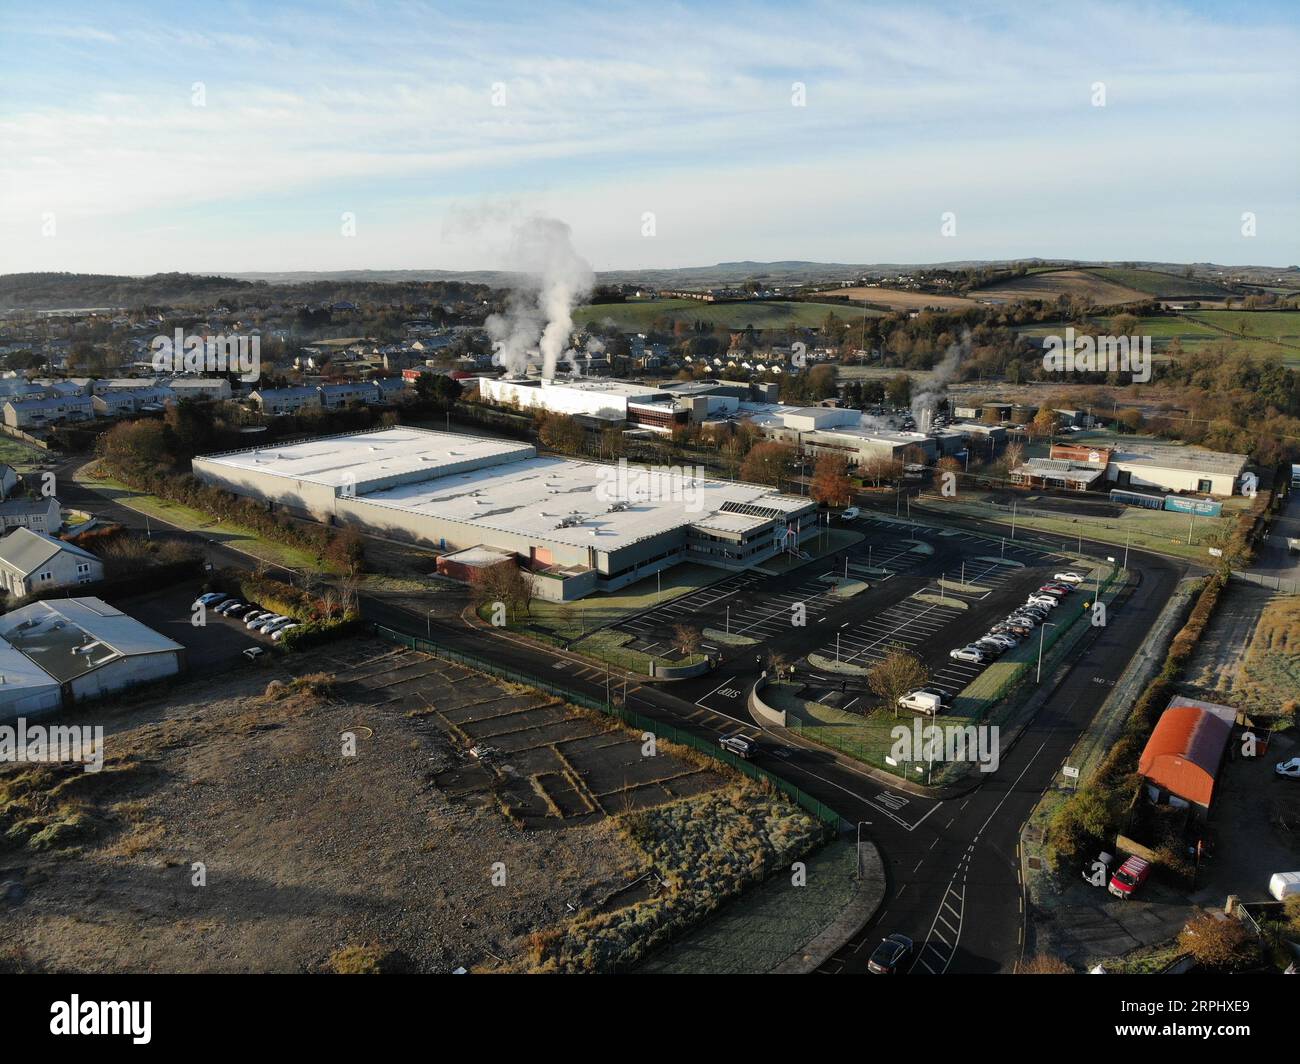 191119 -- DUBLIN, Nov. 19, 2019 -- Aerial photo taken on Nov. 18, 2019 shows an infant formula production factory in Monaghan, northeast Ireland. A ceremony to mark the completion of the construction of the infant formula production factory by a Chinese company was held in Ireland s northeast County Monaghan on Monday. Located in Carrickmacross, the second largest town in County Monaghan, the new factory with an investment of over 20 million euros about 22 million U.S. dollars, which is fully funded by Shanghai Newbaze Dairy Product Co., Ltd. SNDP, a private infant formula producer headquarter Stock Photo